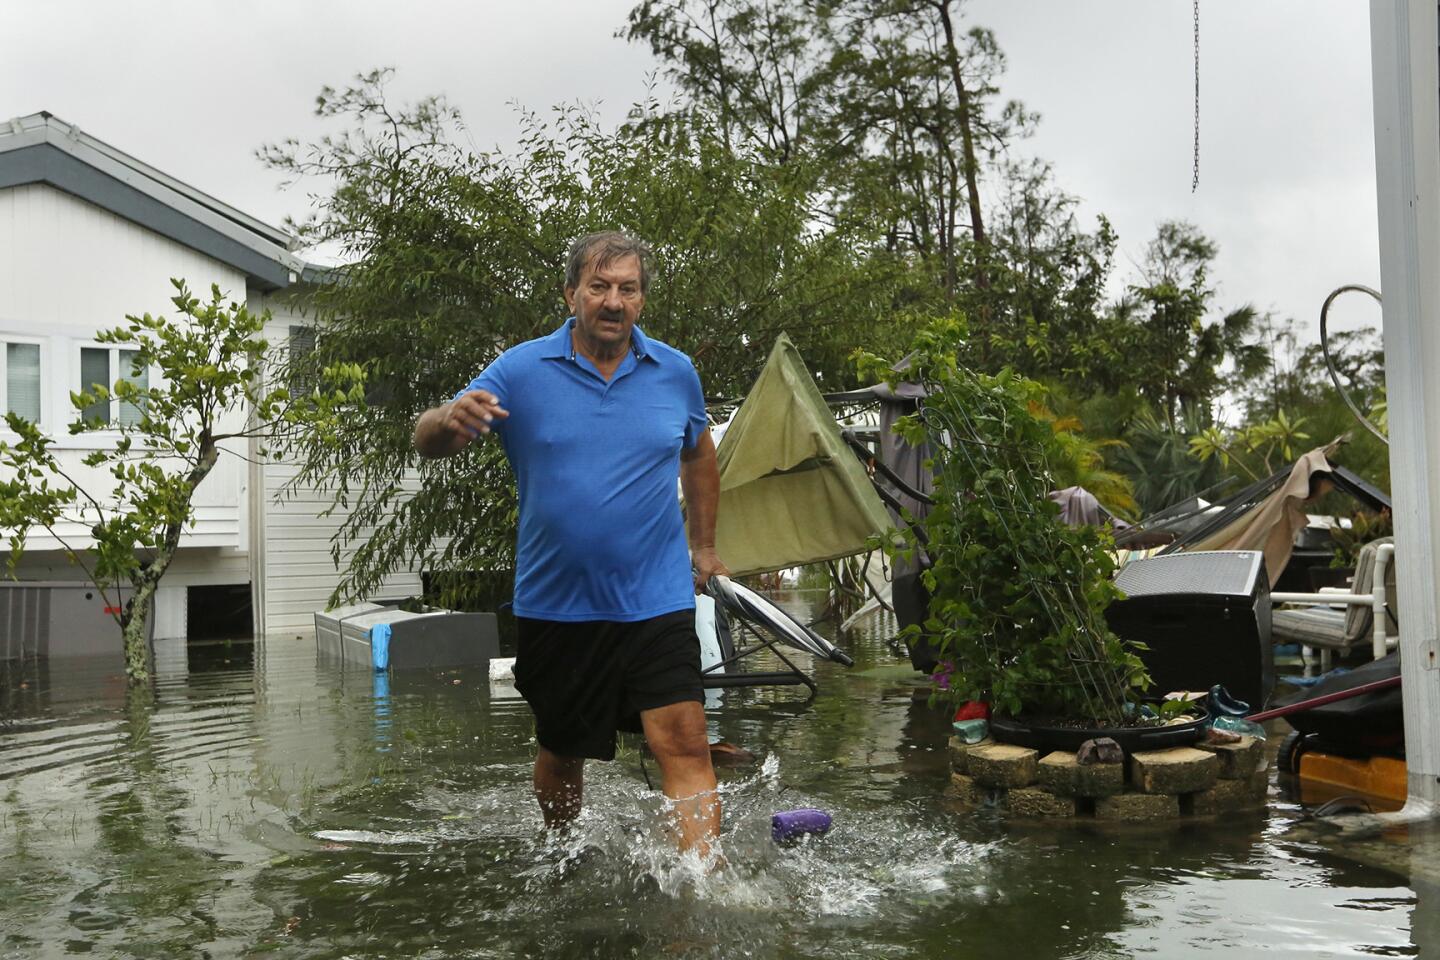 John Krowzow, 74, wades in floodwater to check out his homes in Corkscrew Woodlands, a park with 640